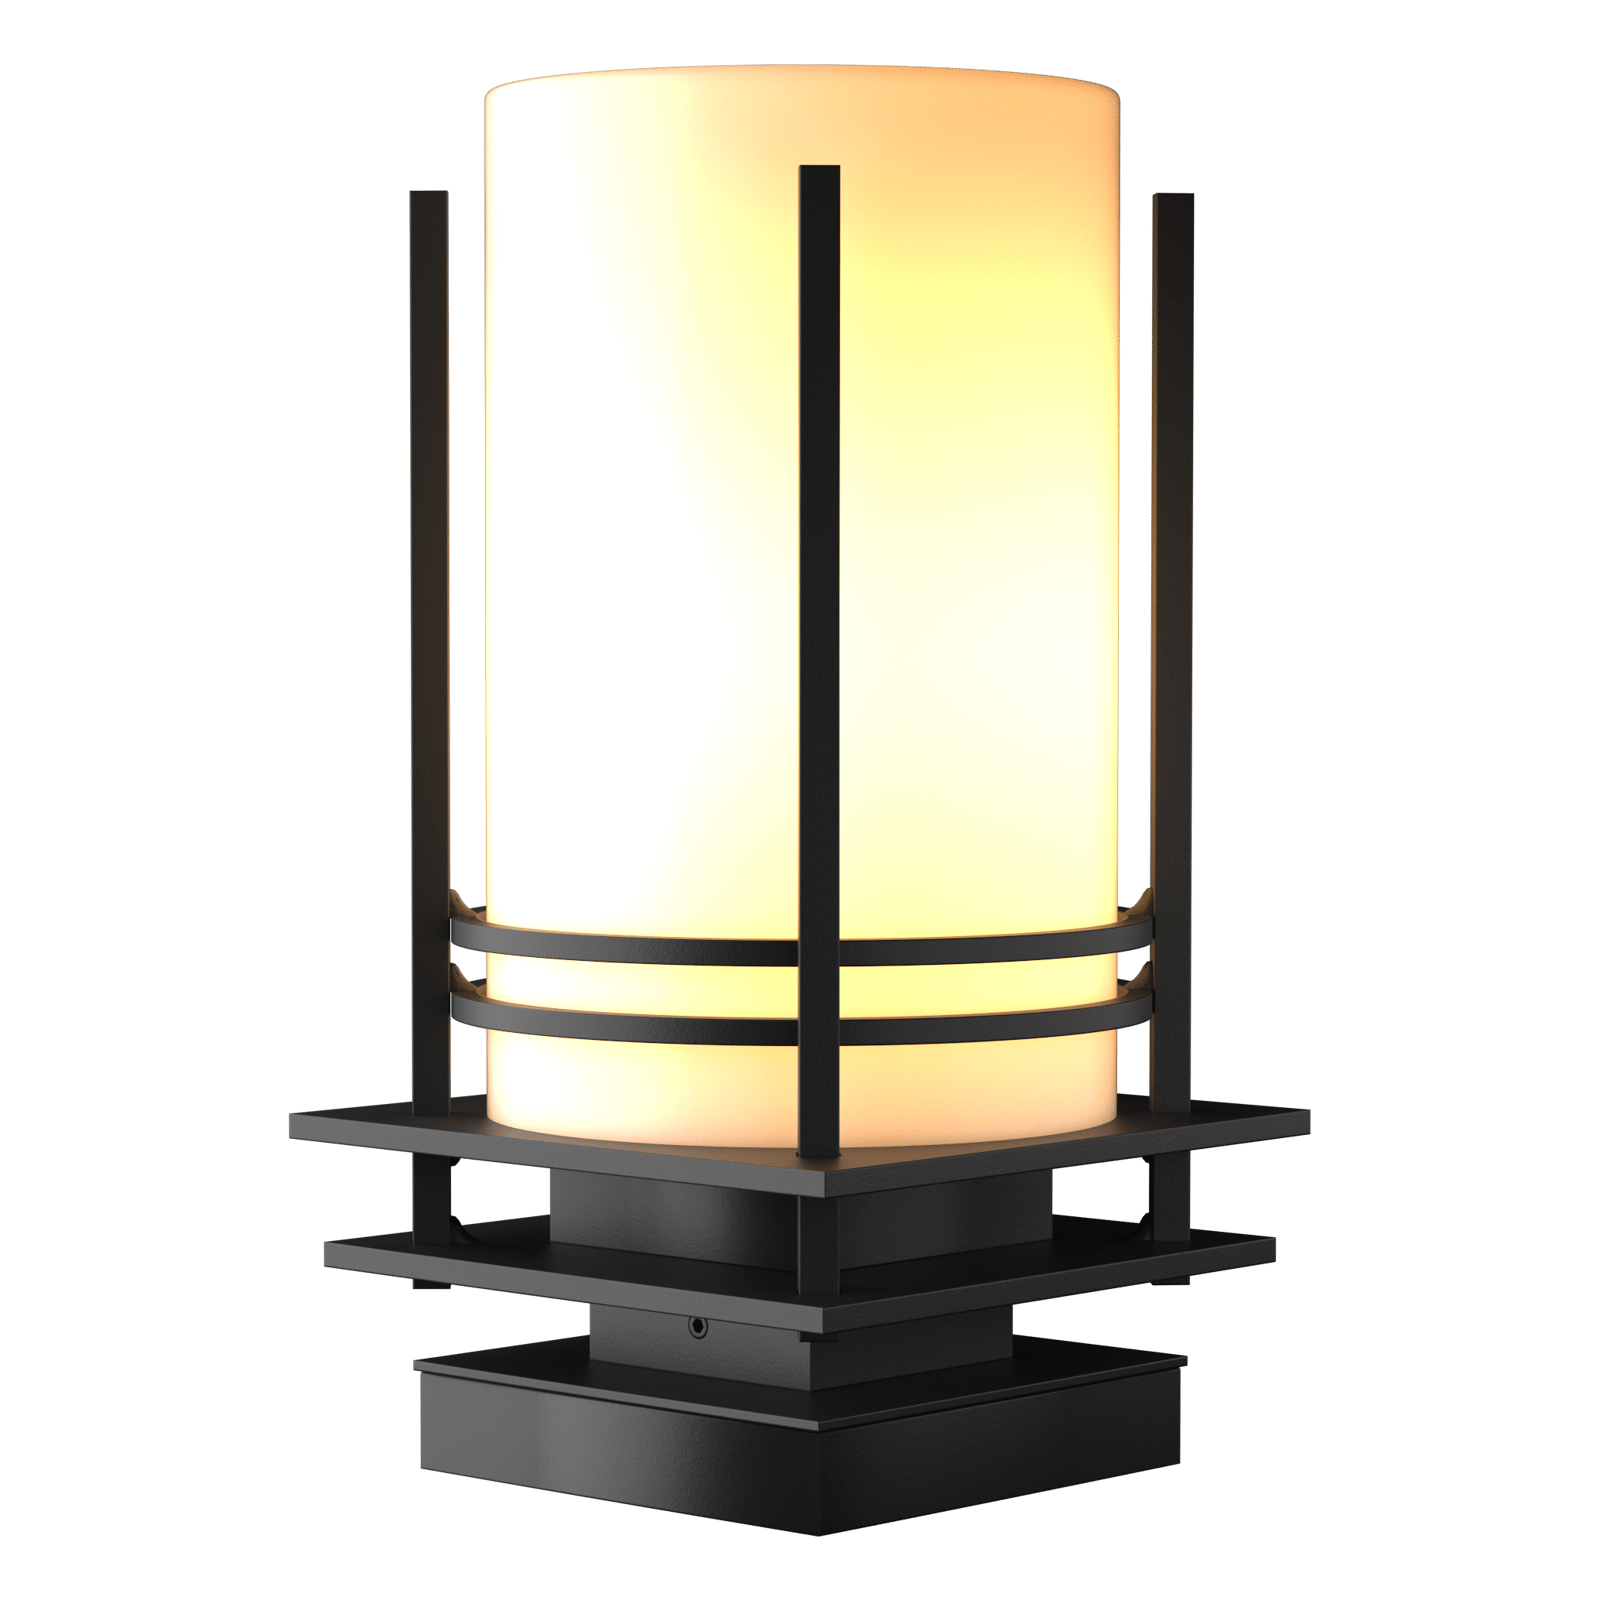 Hubbardton Forge Banded Outdoor Pier Mount